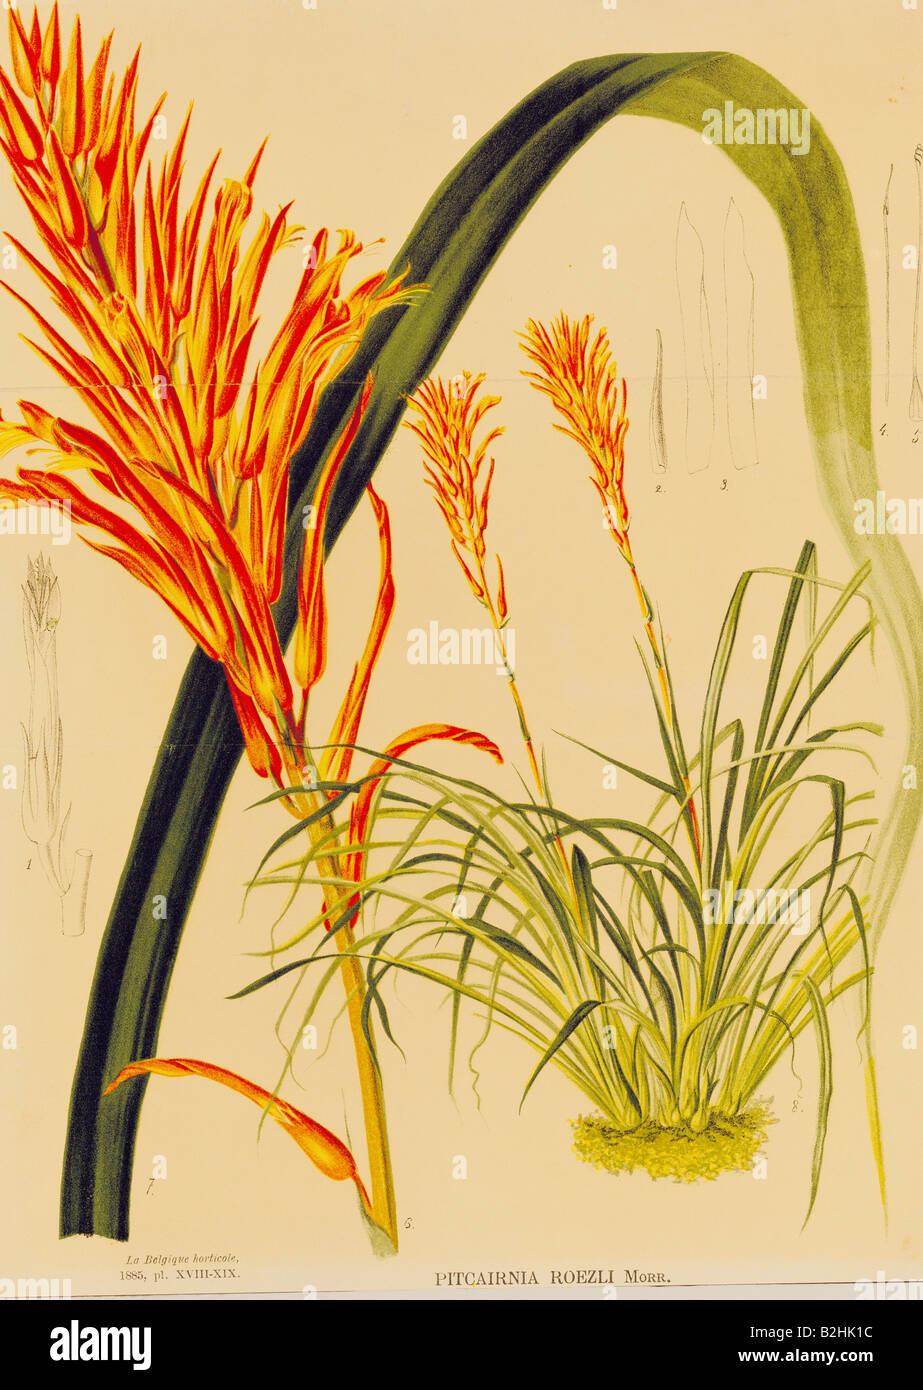 botany, flowers, Pitcairnia (Pitcairnia roezlii), colour lithograph, 31.6 cm x 23.5 cm, from 'La Belgique horticole' (Horticulture in Belgium), 1885, private collection, Stock Photo